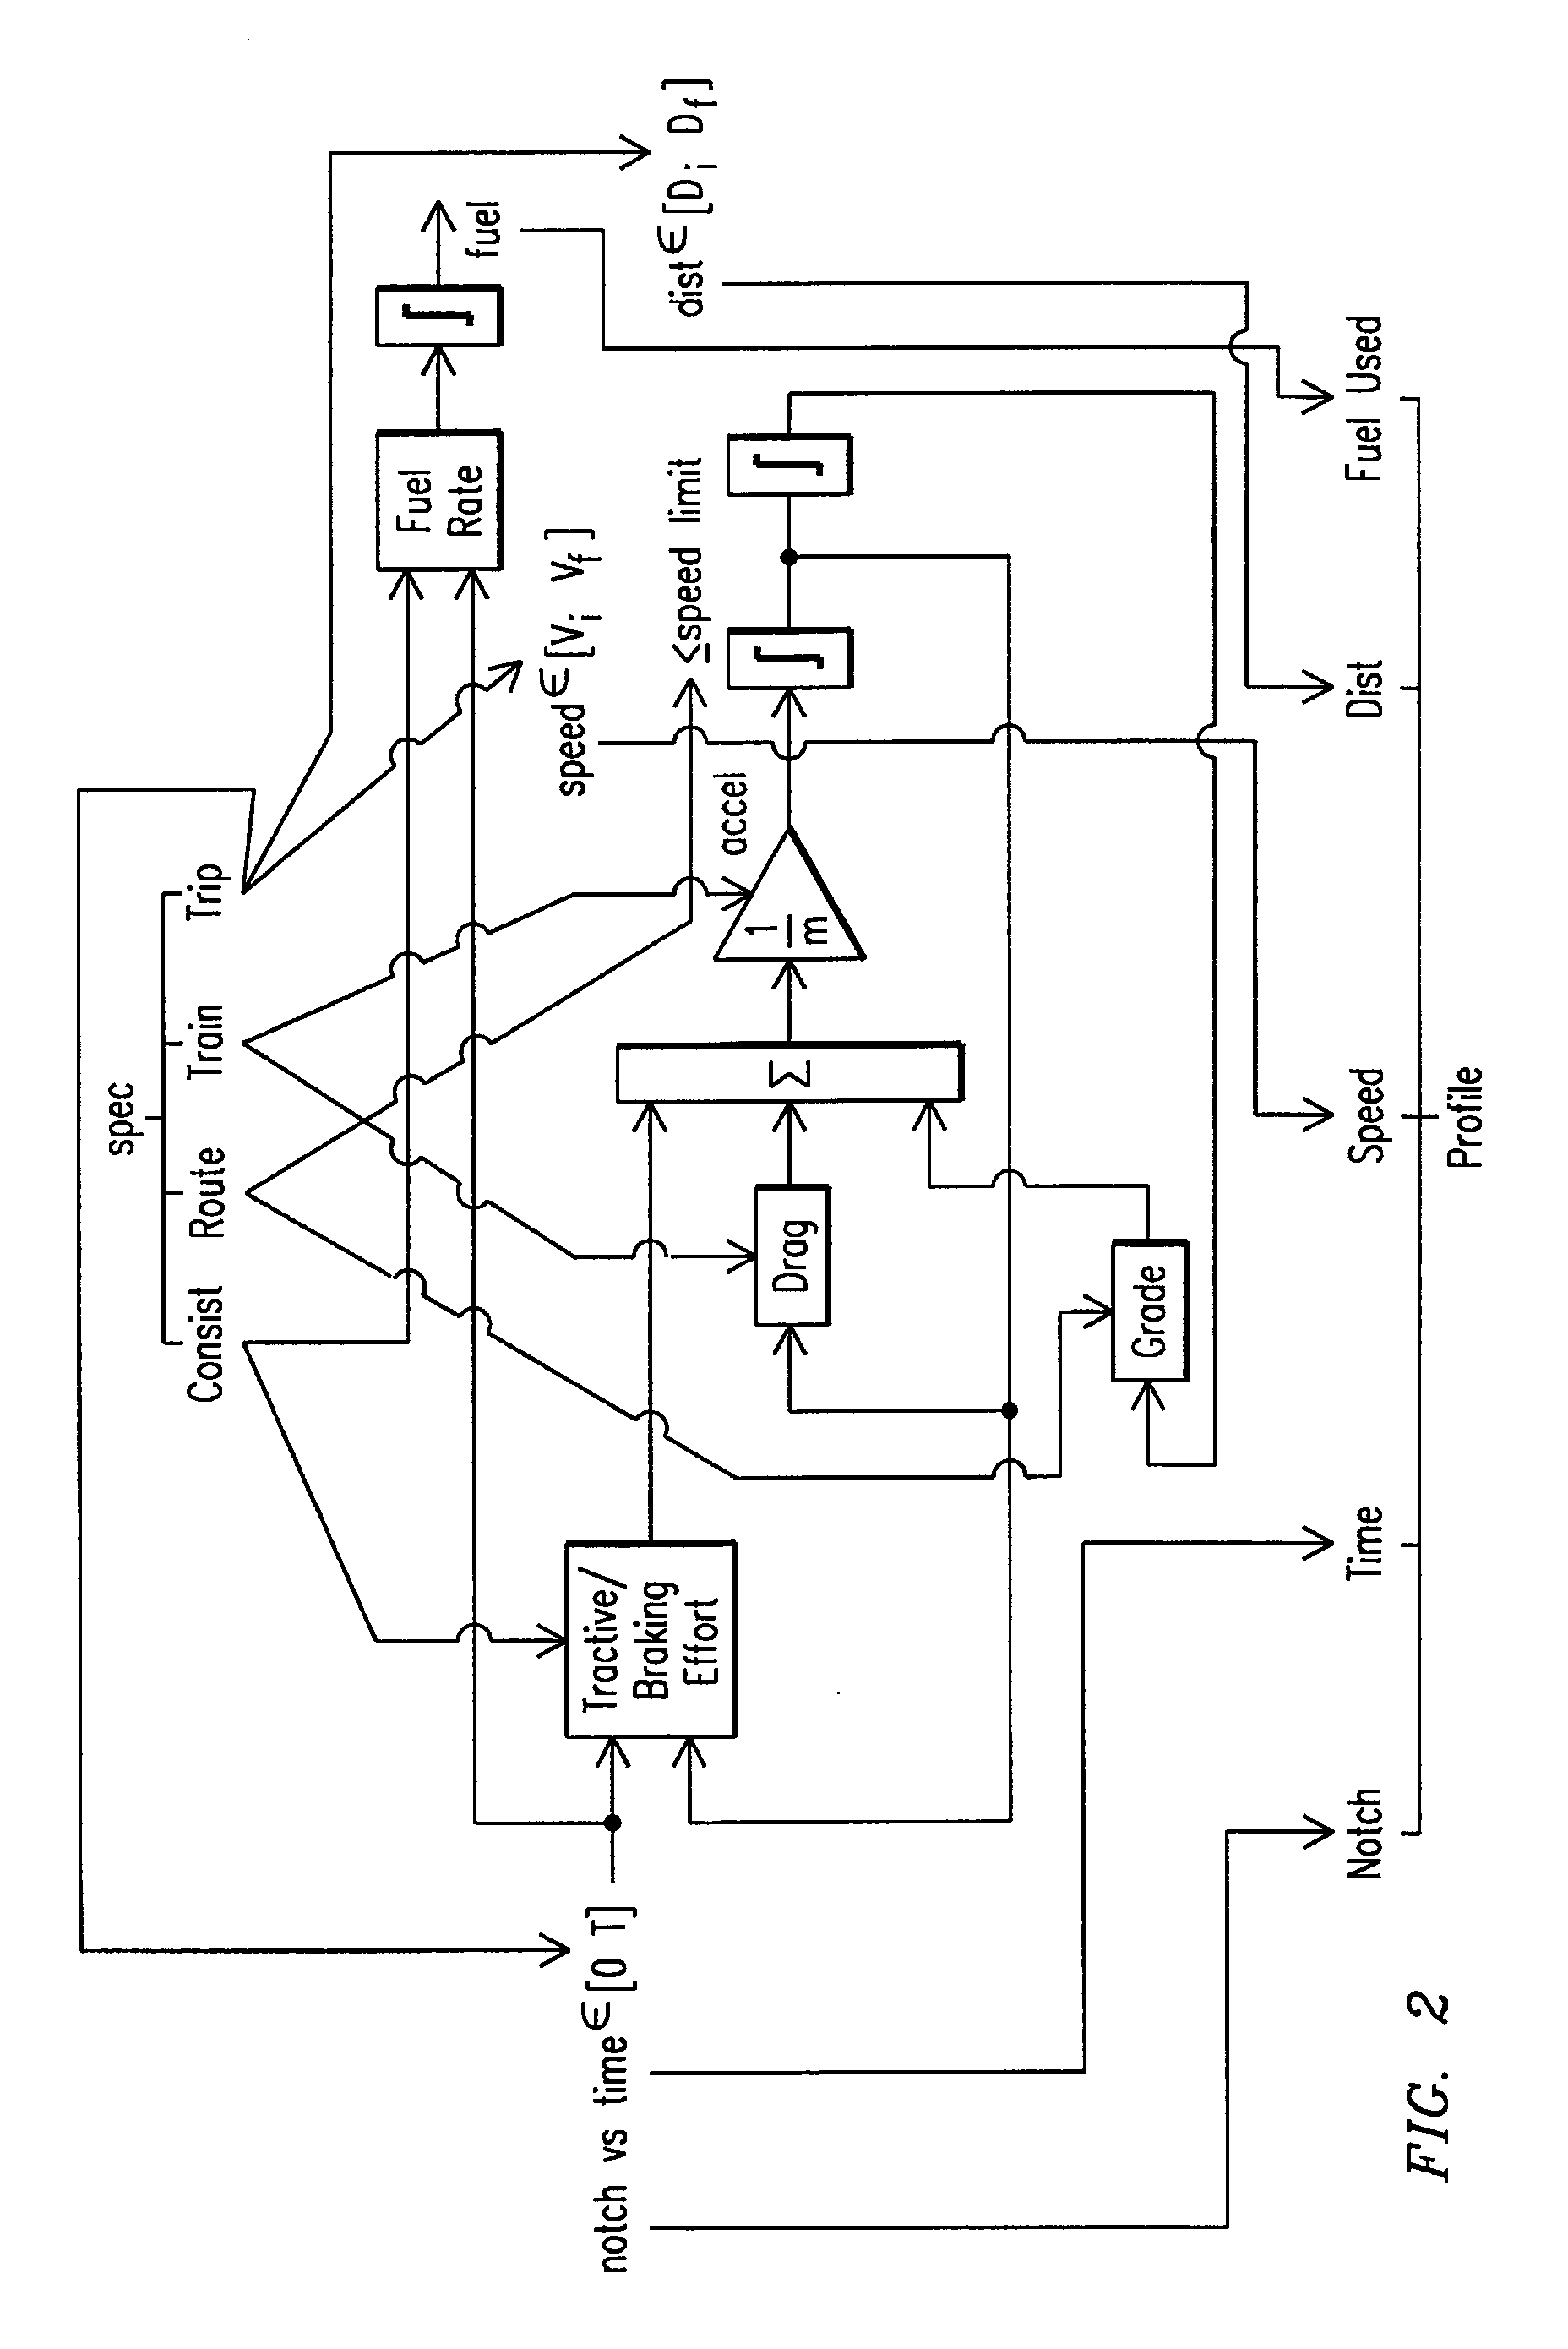 System, method, and computer software code for optimized fuel efficiency emission output, and mission performance of a diesel powered system